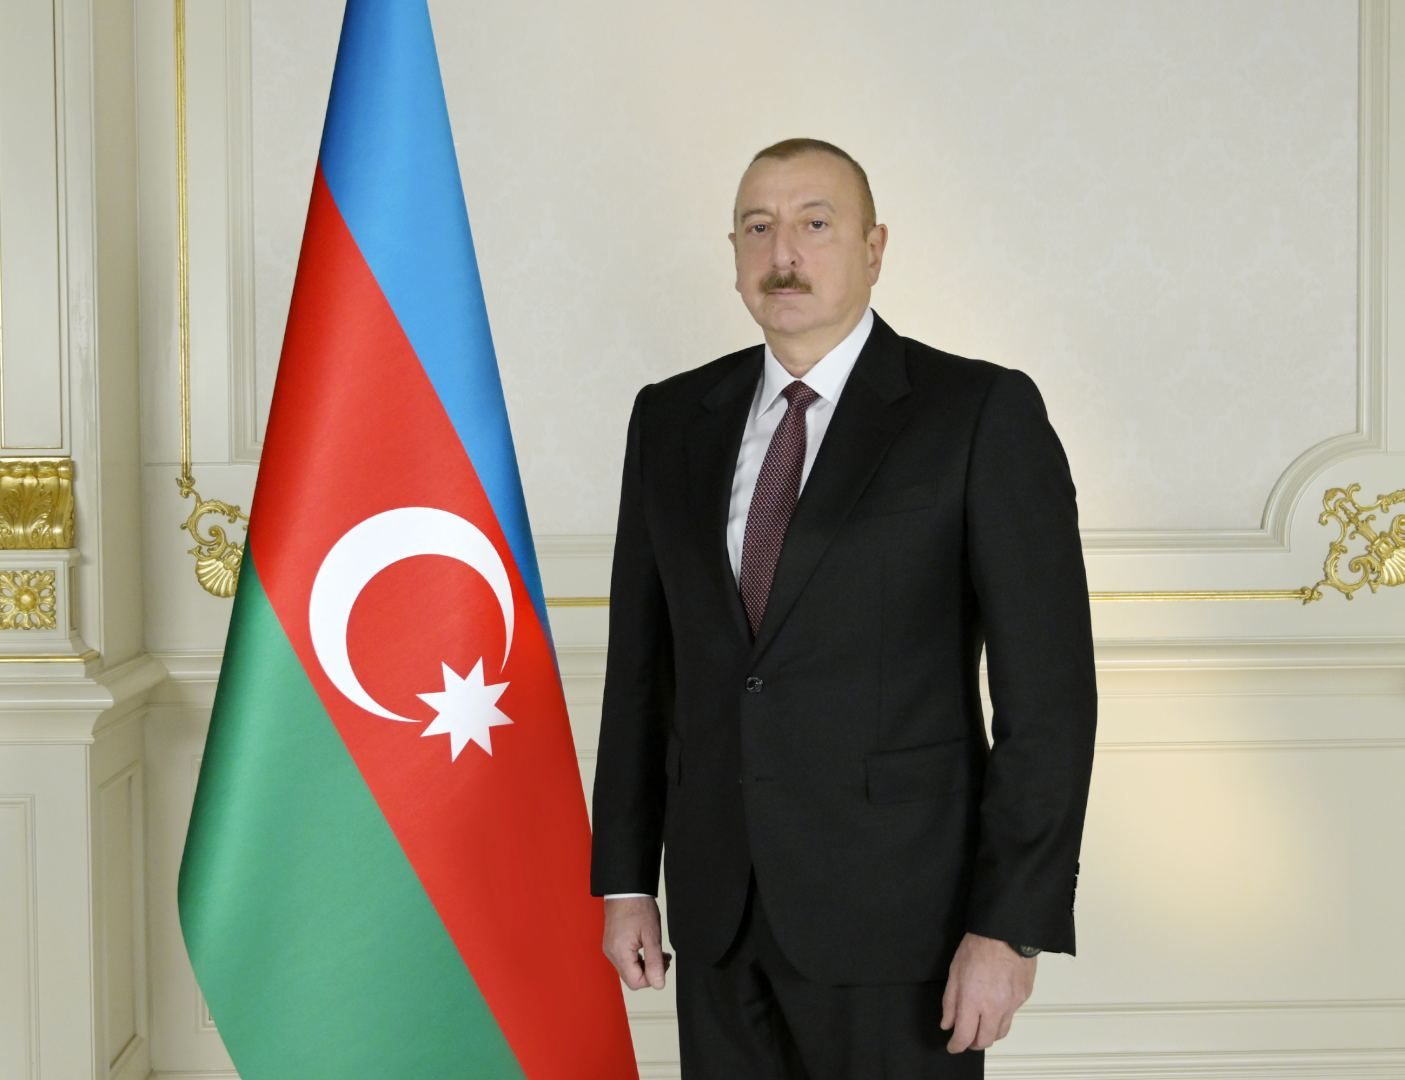 President Ilham Aliyev attends informal dinner in honor of heads of state of 9th Summit of Organization of Turkic States in Samarkand